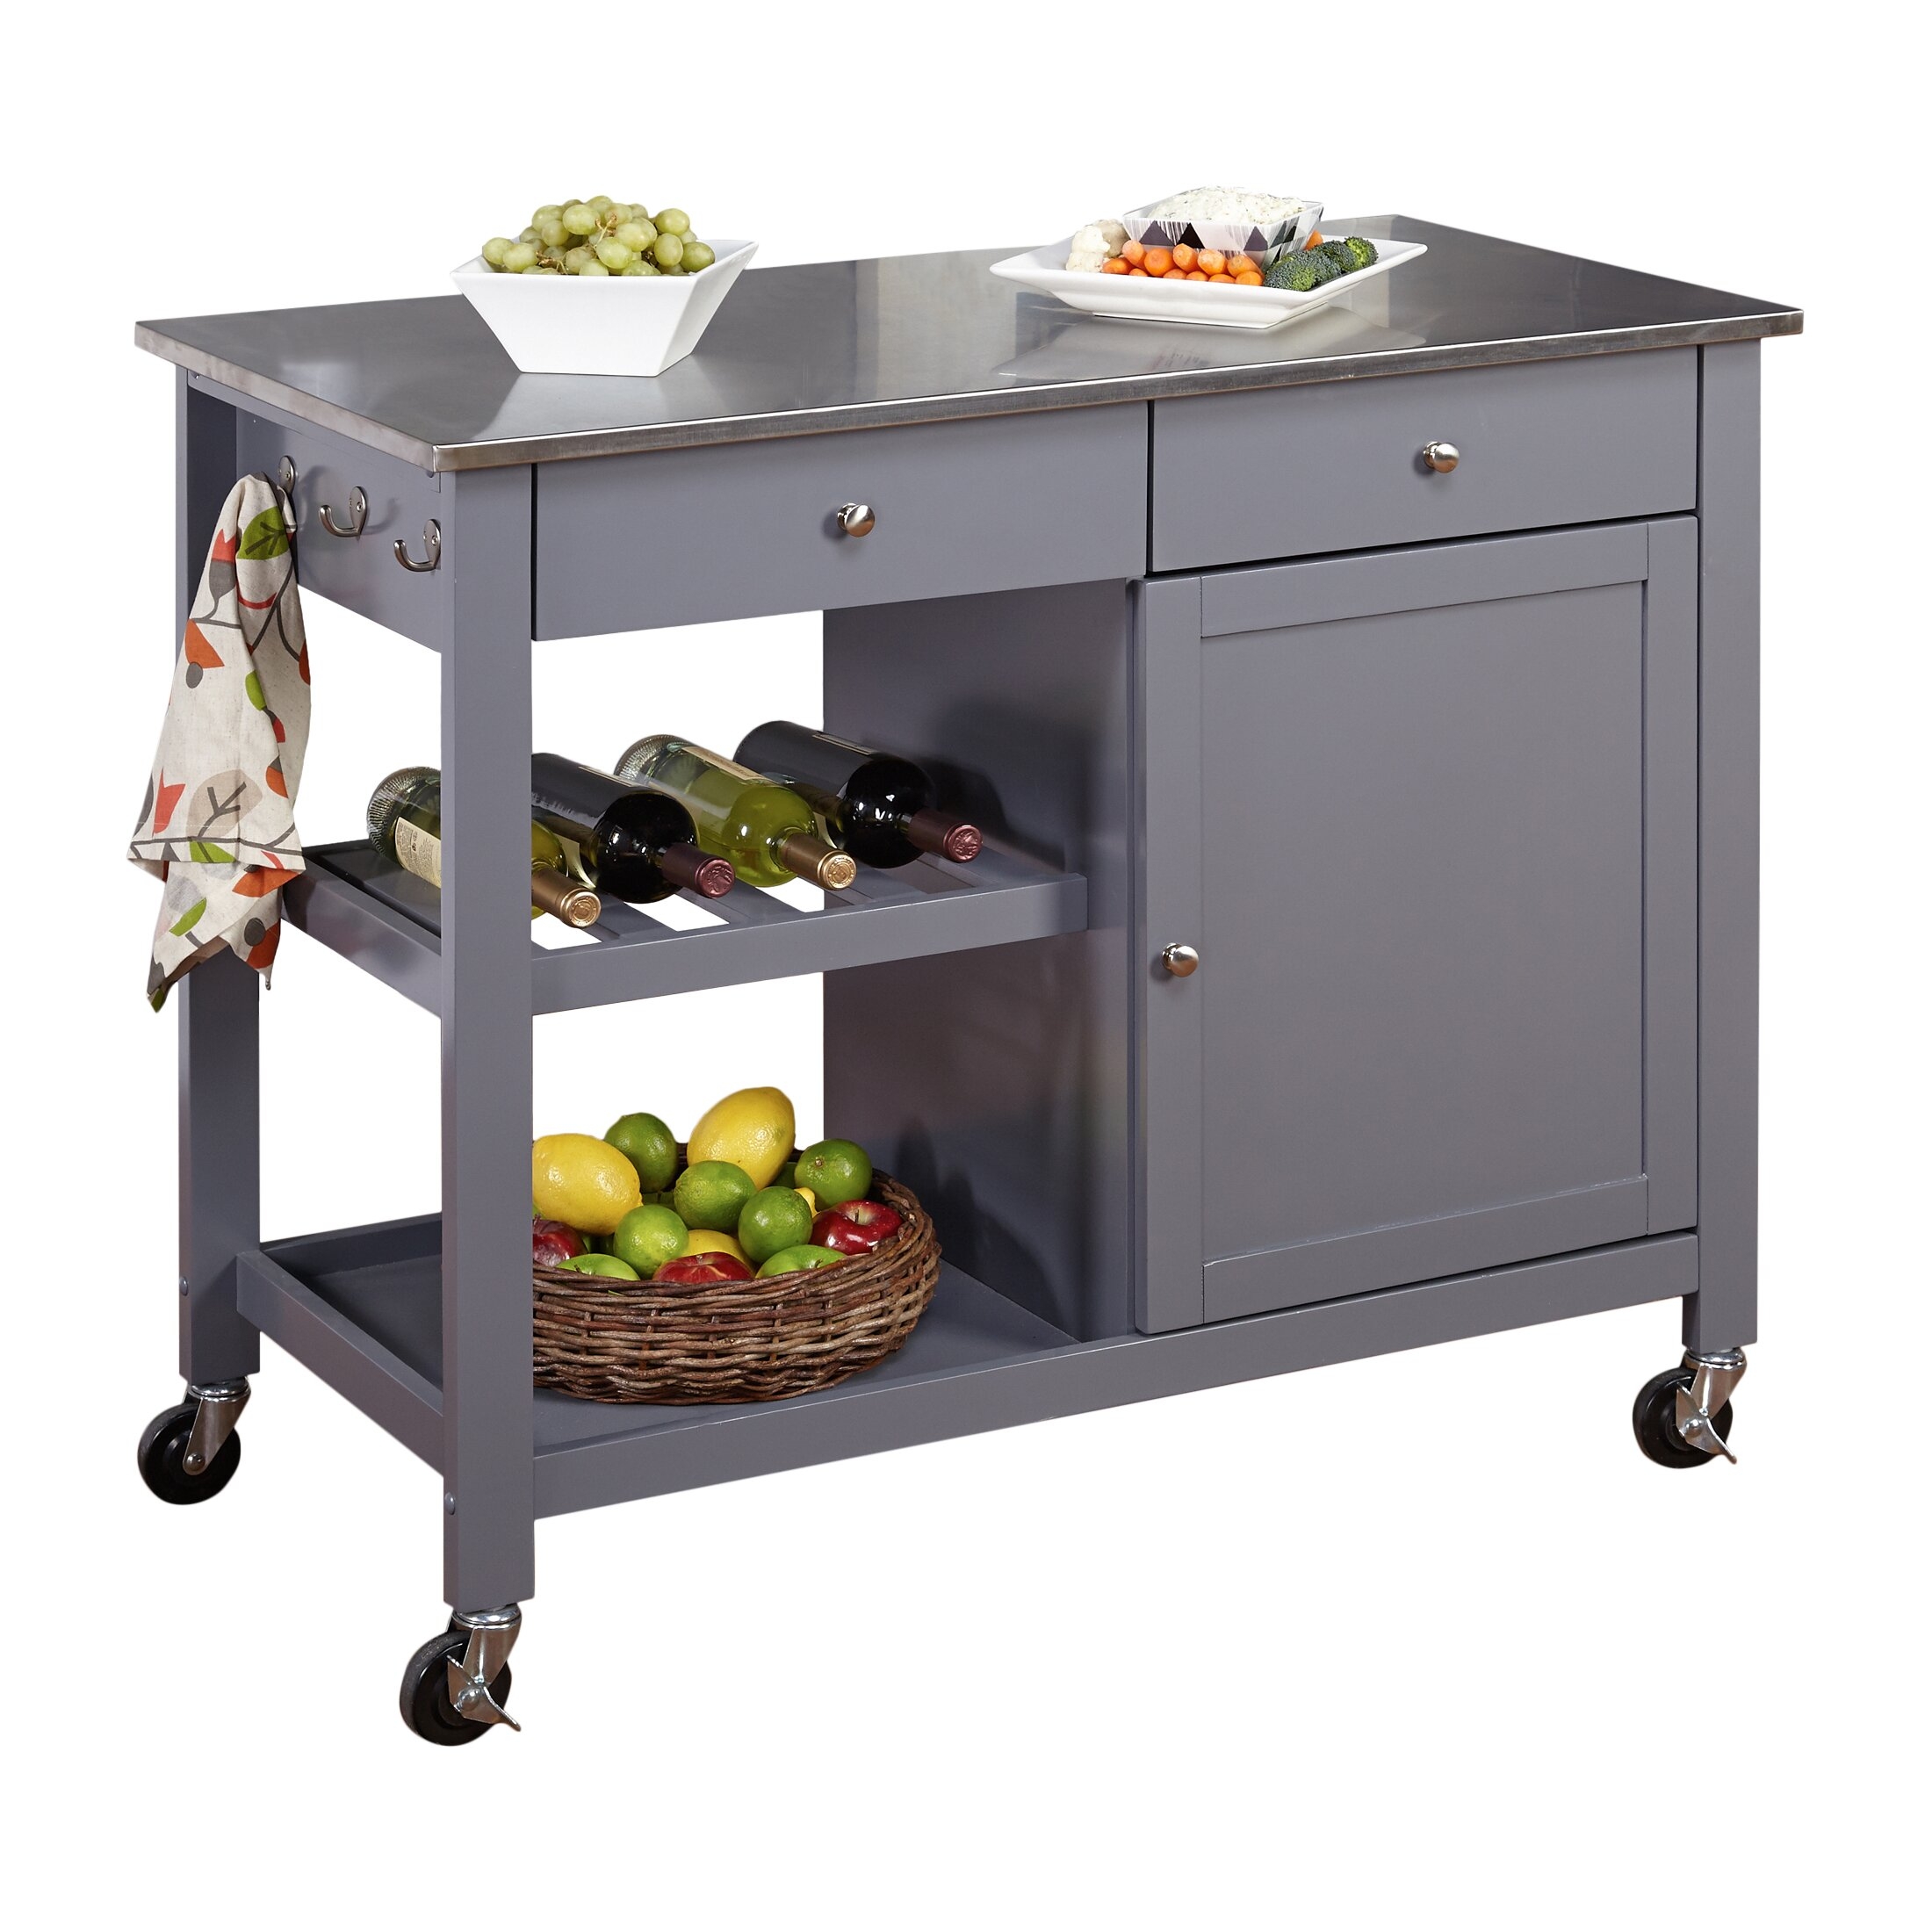 Kitchen island with stainless steel top 32